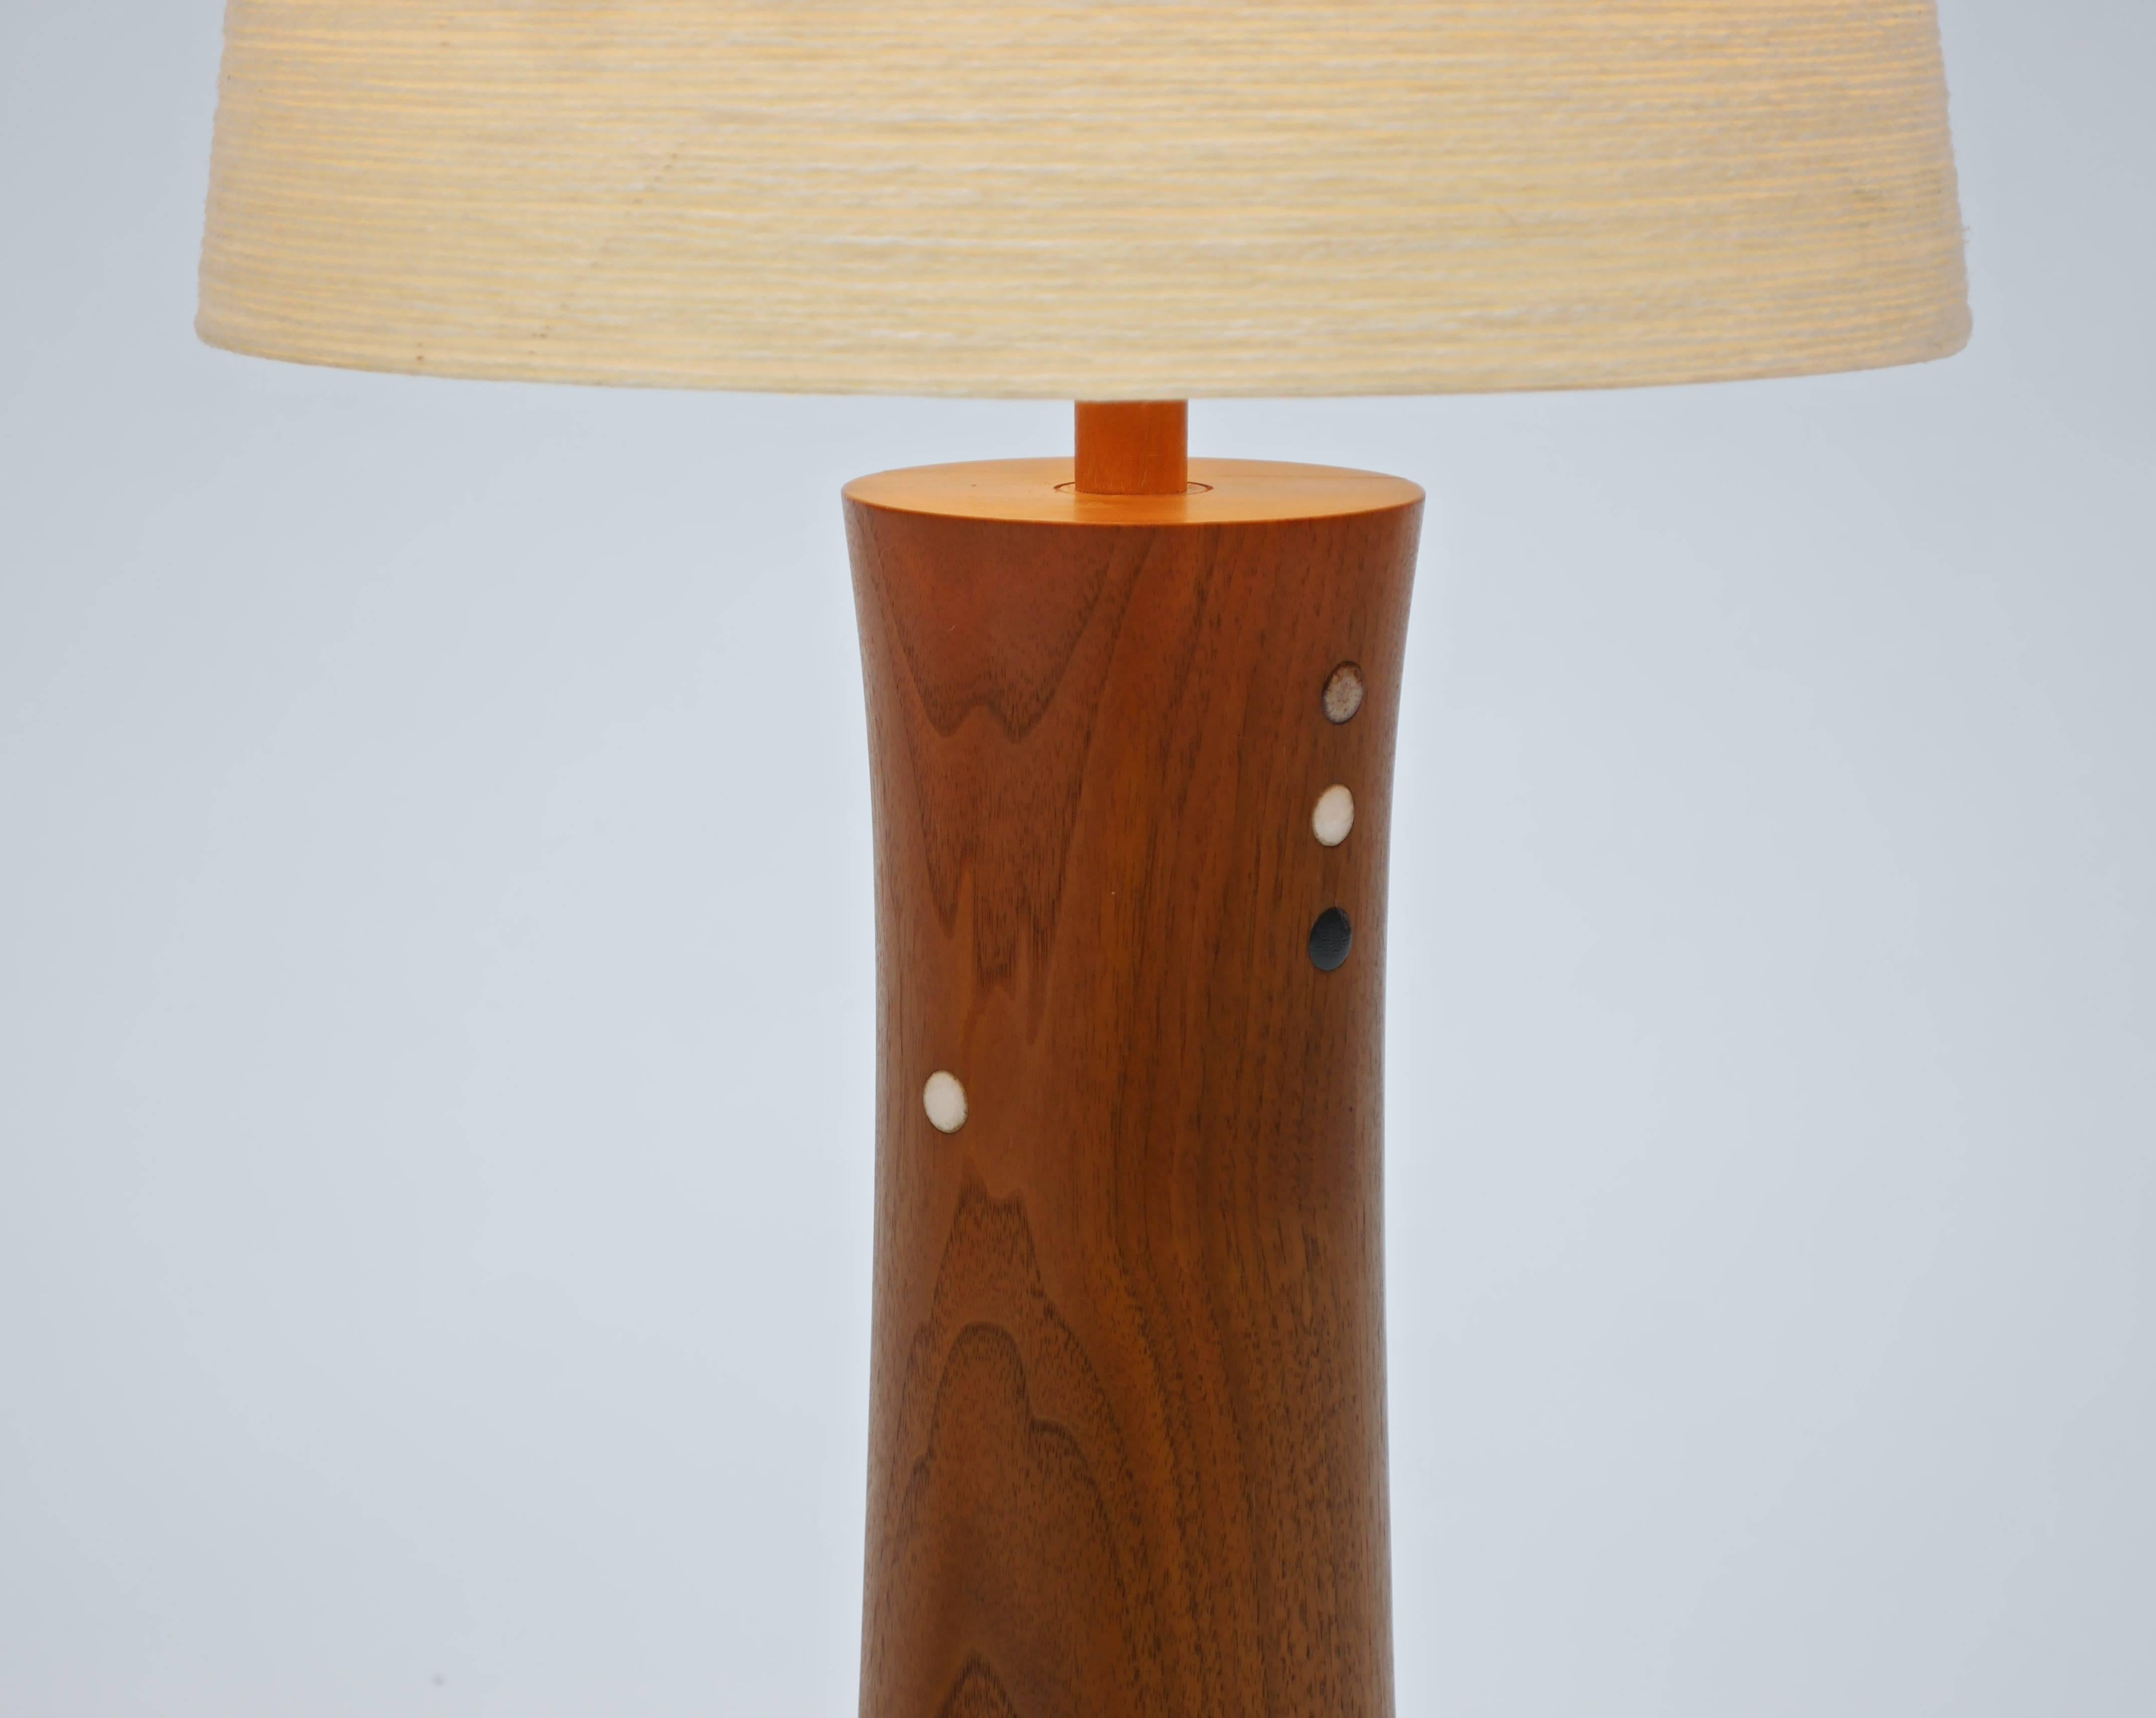 20th Century Pair of Turned Walnut and Tile Table Lamps by Gordon and Jane Martz For Sale